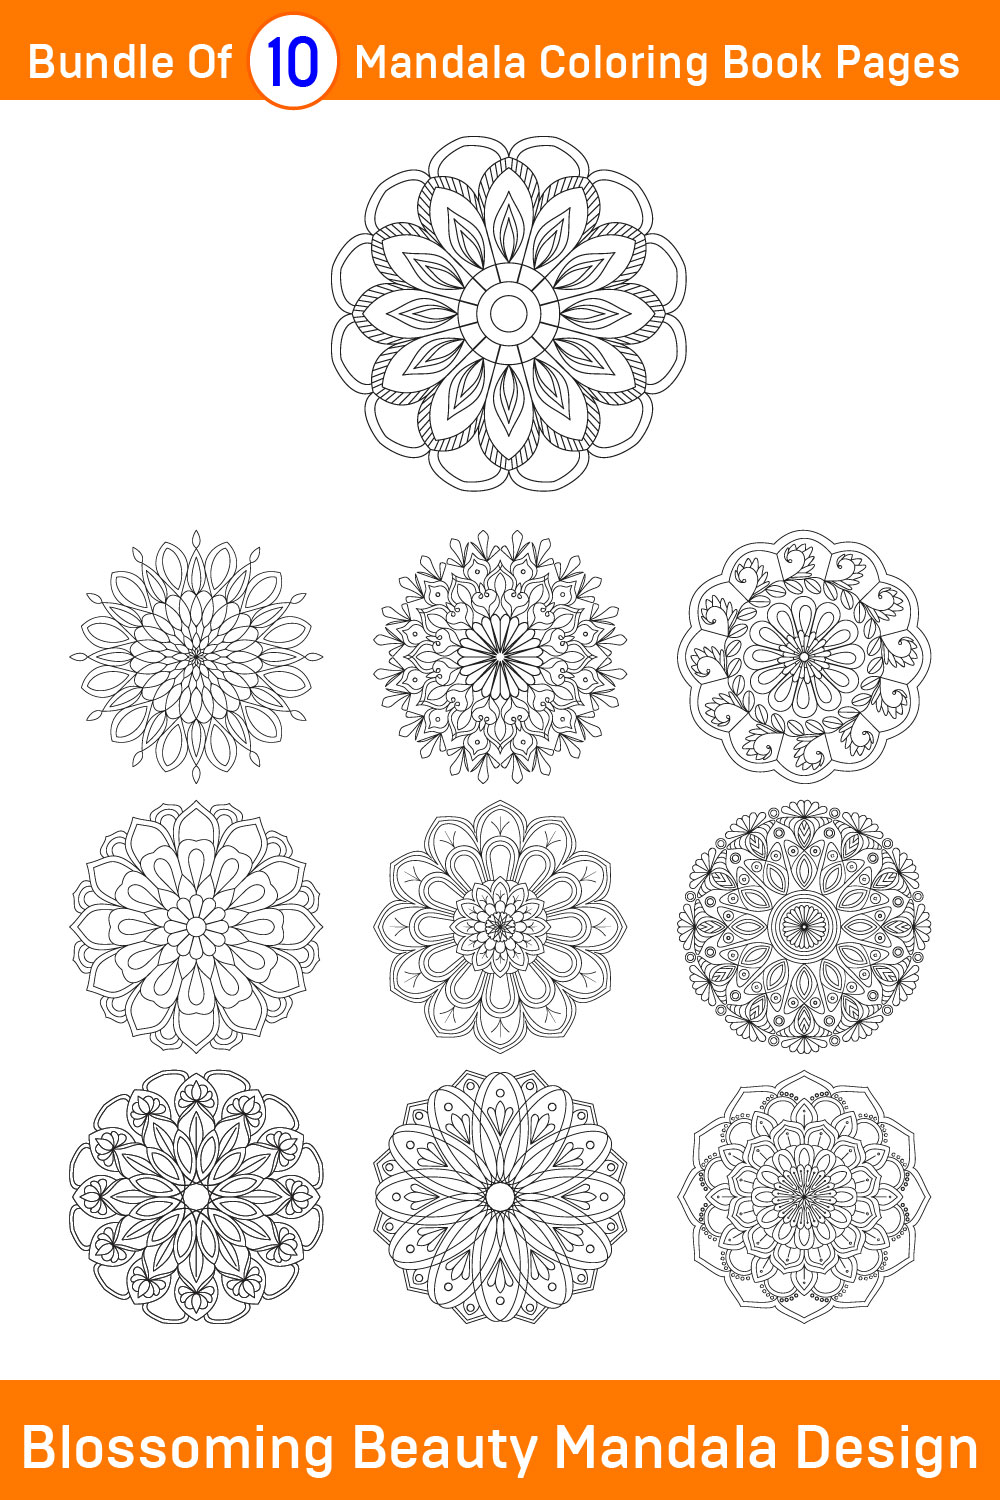 Bundle of 10 Blossoming Beauty Mandala Coloring Book Pages pinterest preview image.